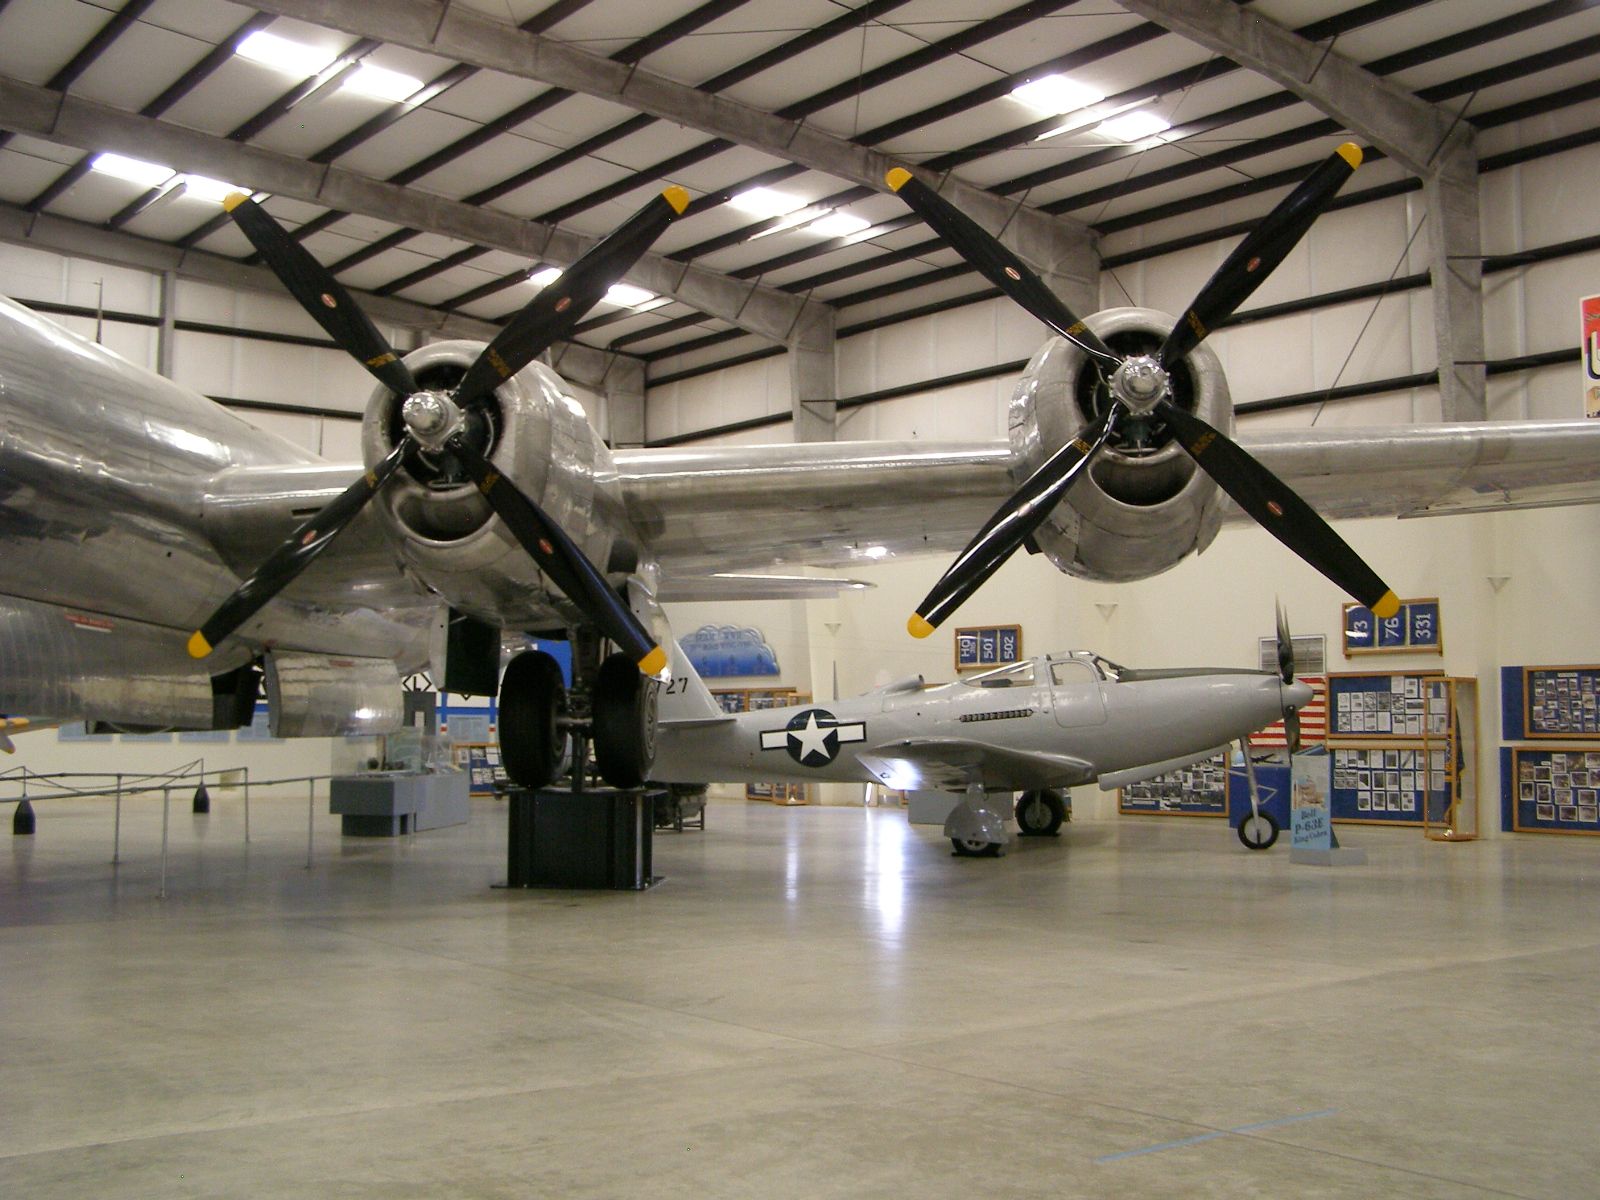 Boeing B29 Superfortress engines